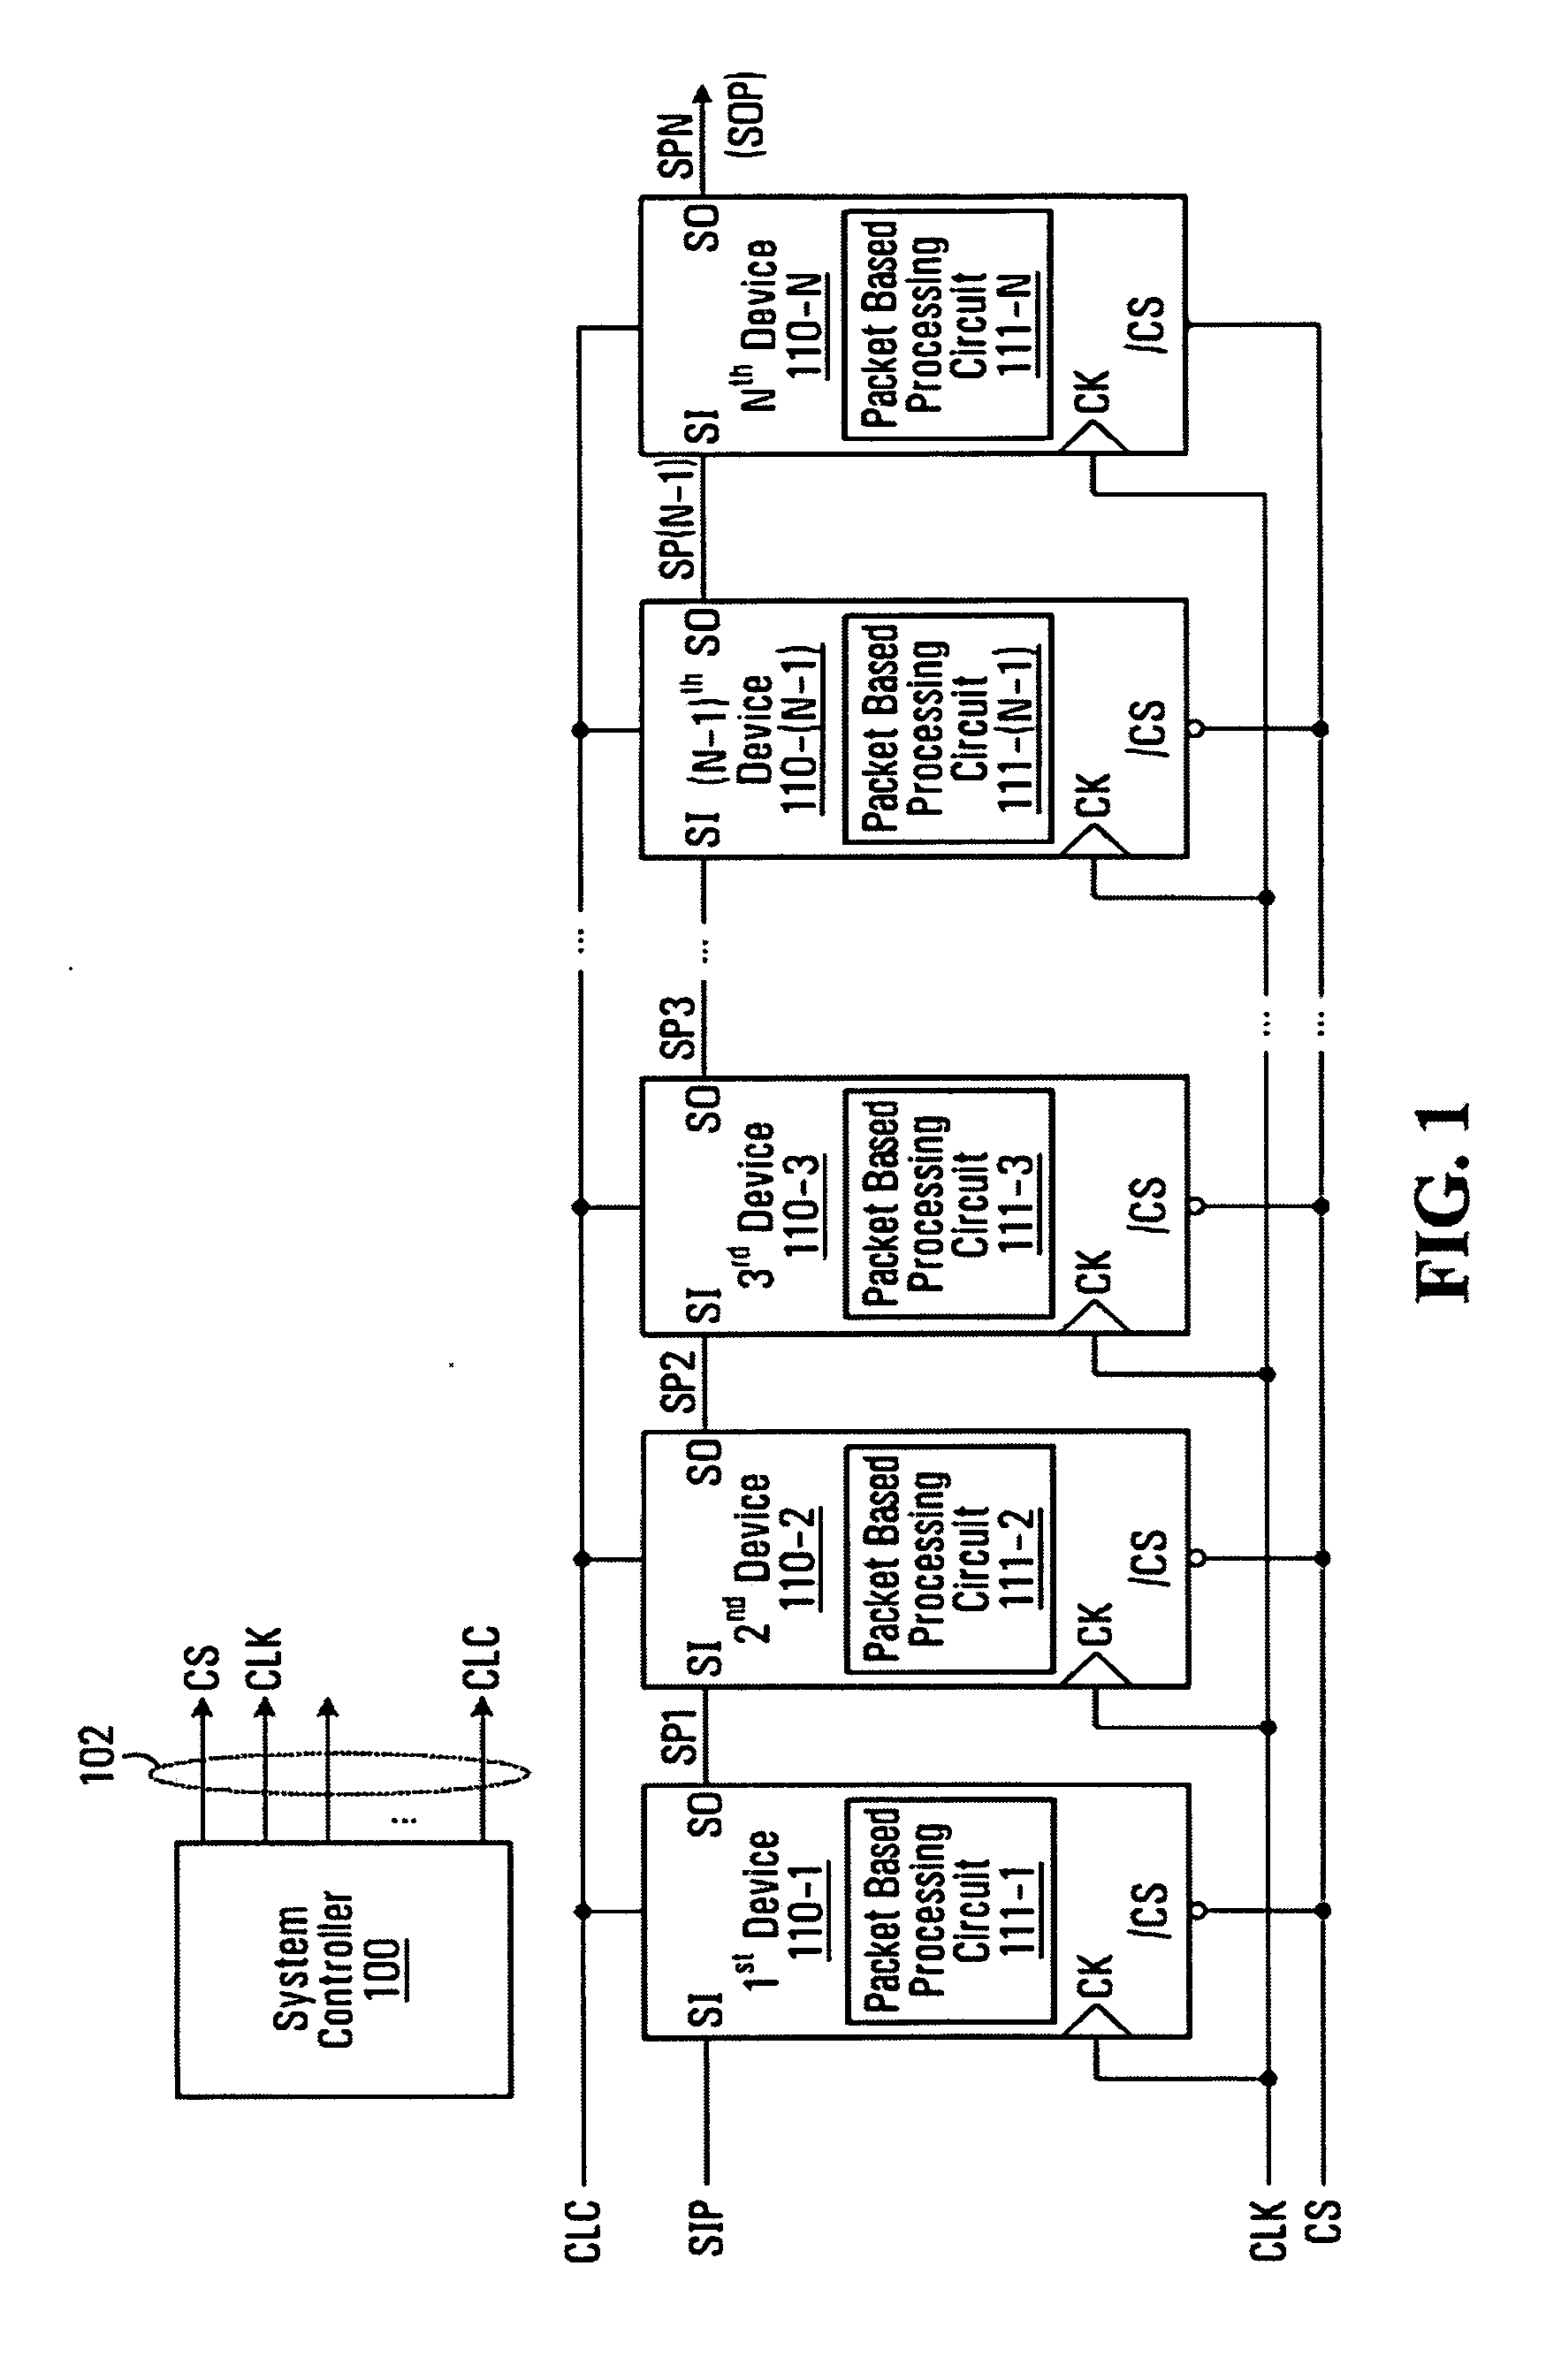 Packet based ID generation for serially interconnected devices